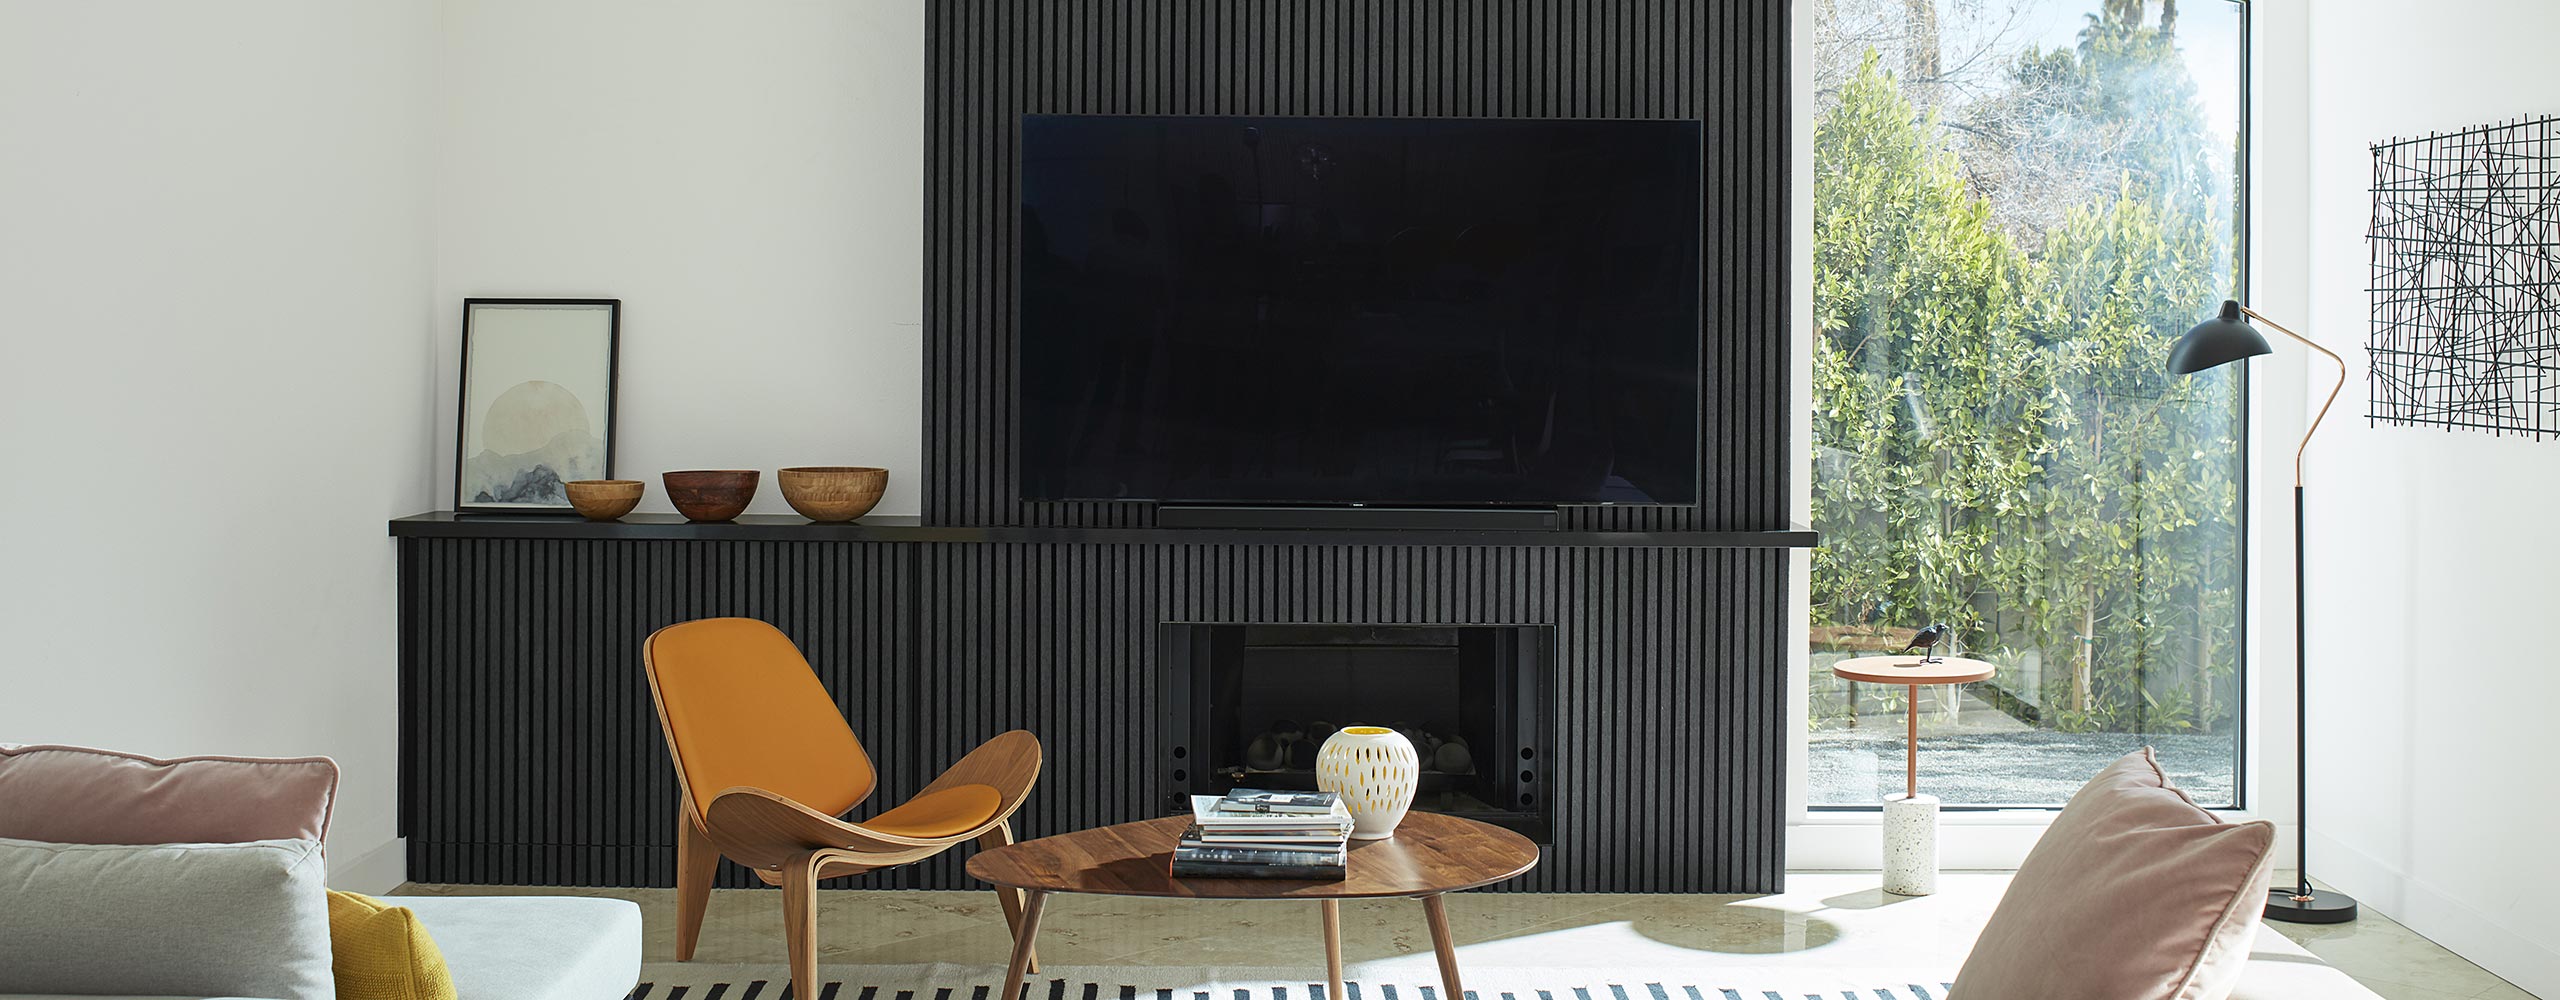 A mid-century modern style living room with bright, white-painted walls and vaulted ceiling, and a black paneled accent wall, built-in cabinet and fireplace, and large screen tv.